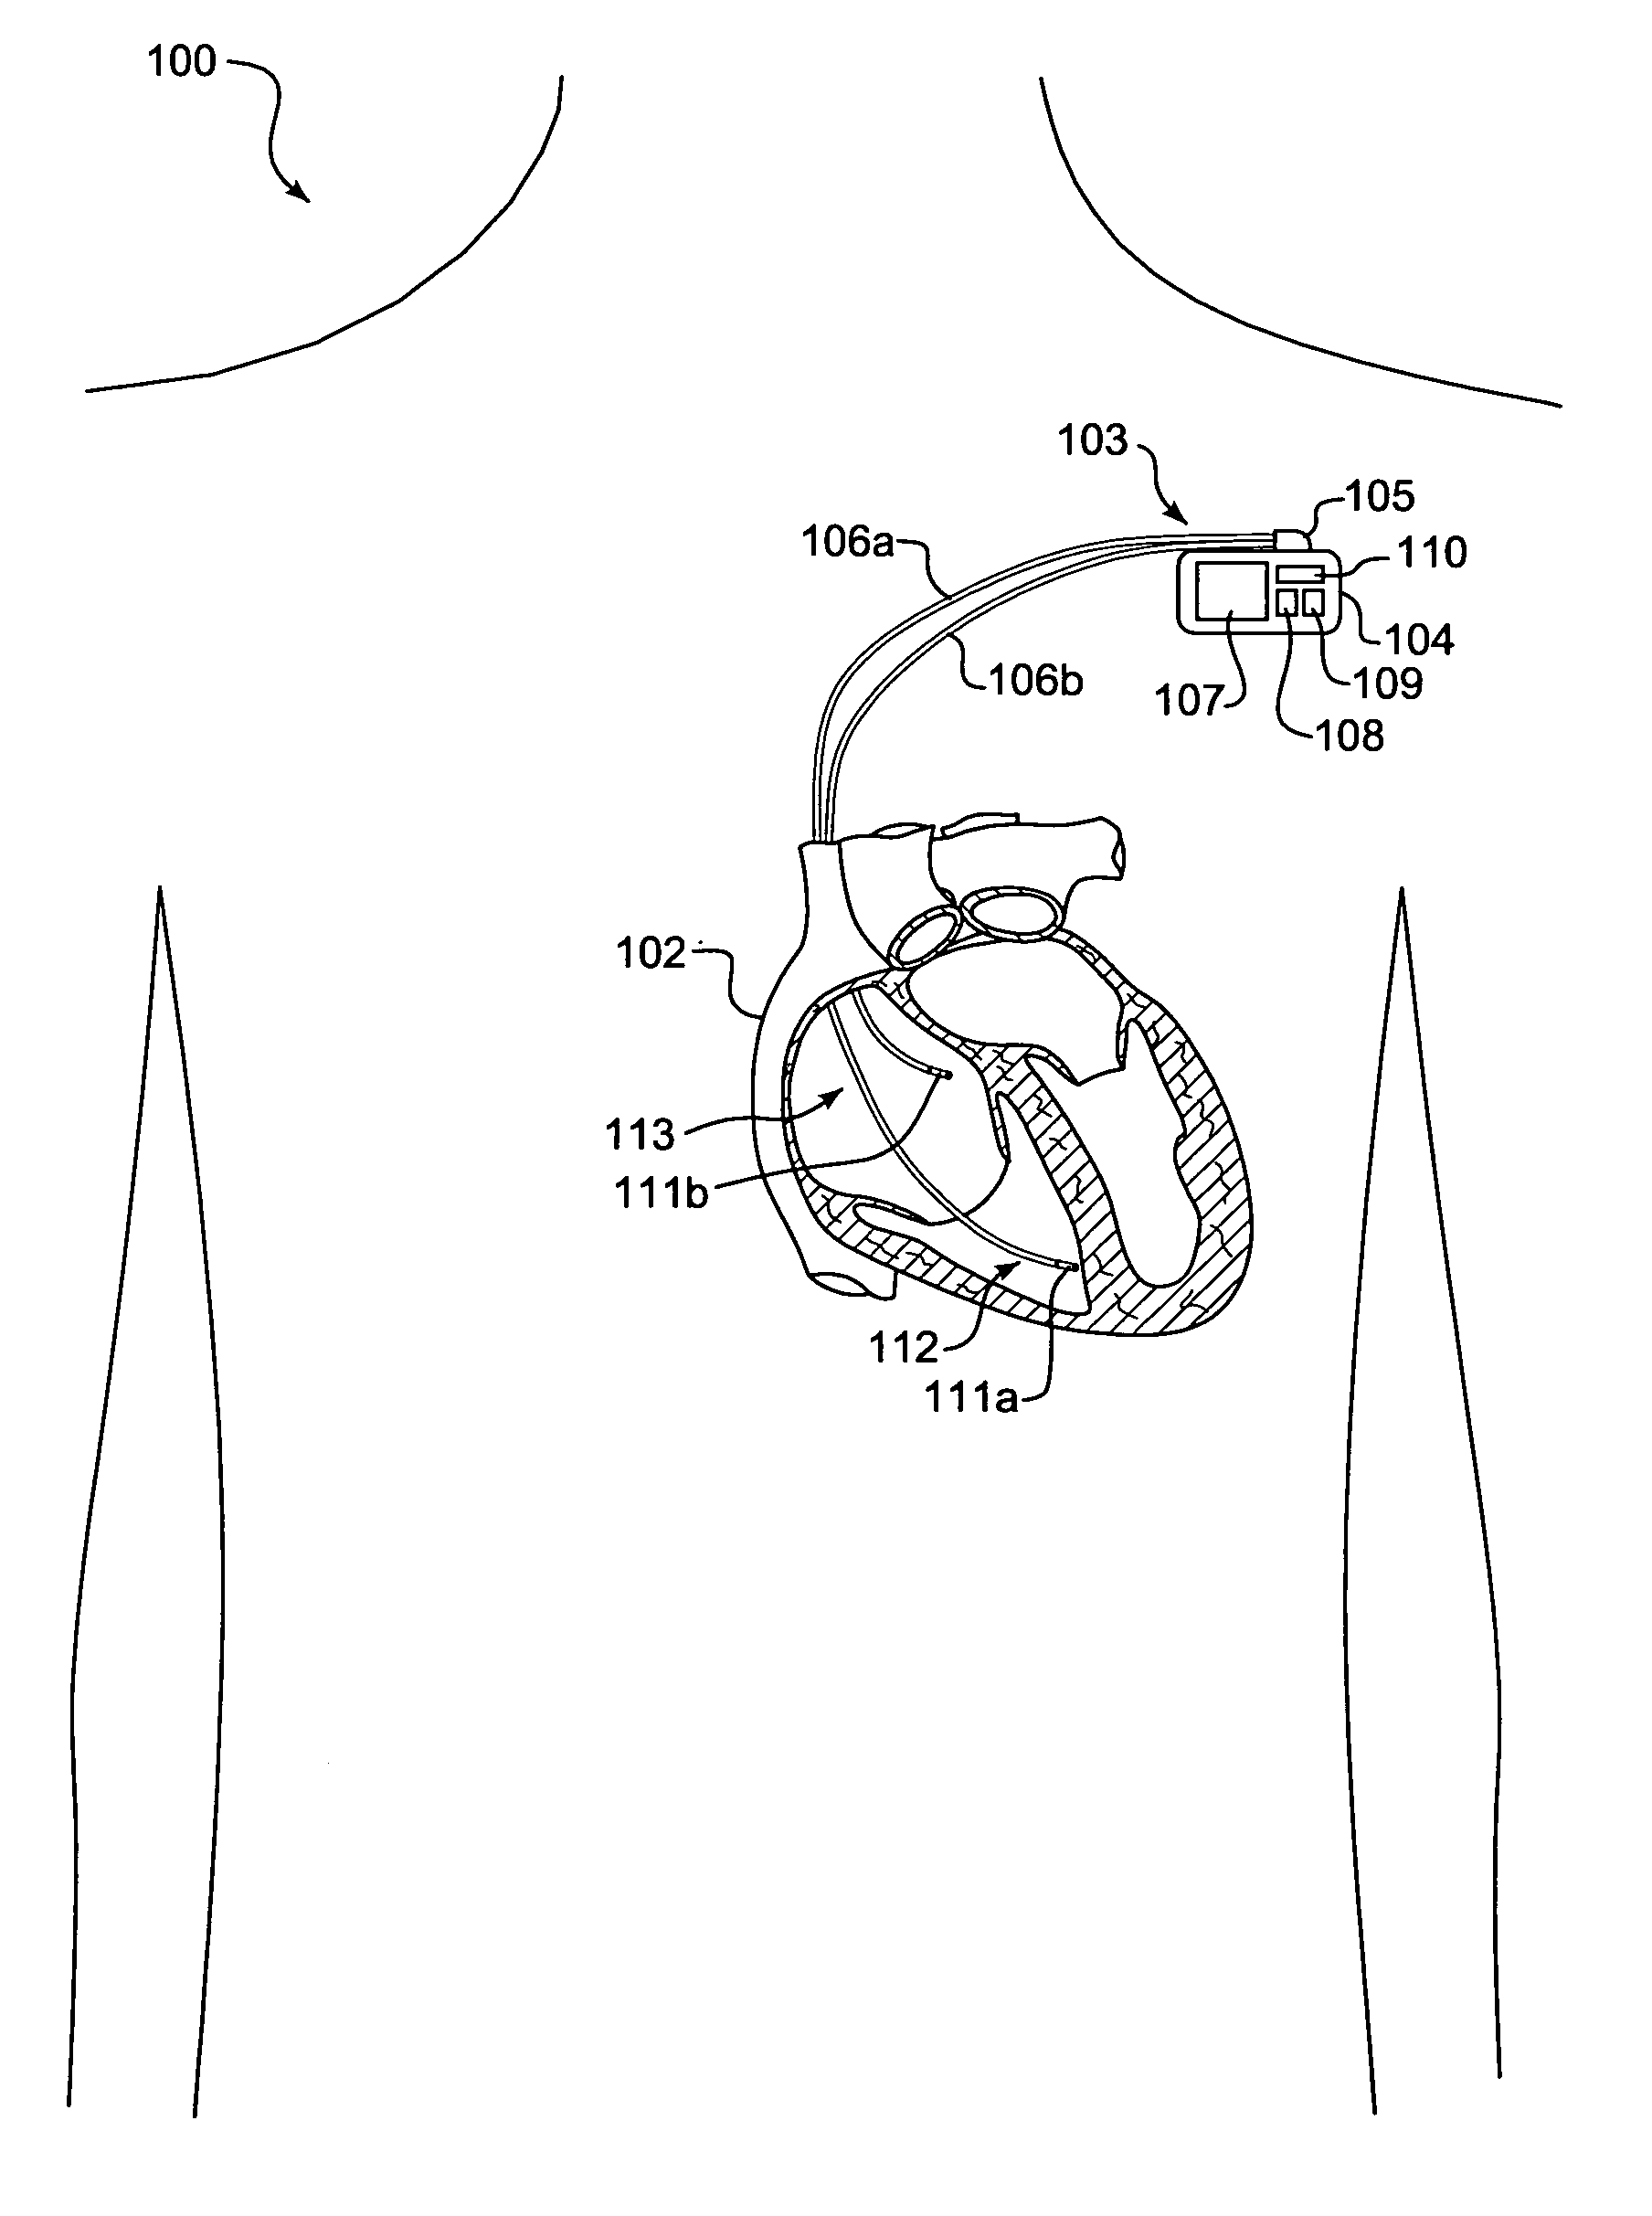 System and method for assessing cardiac performance through transcardiac impedance monitoring